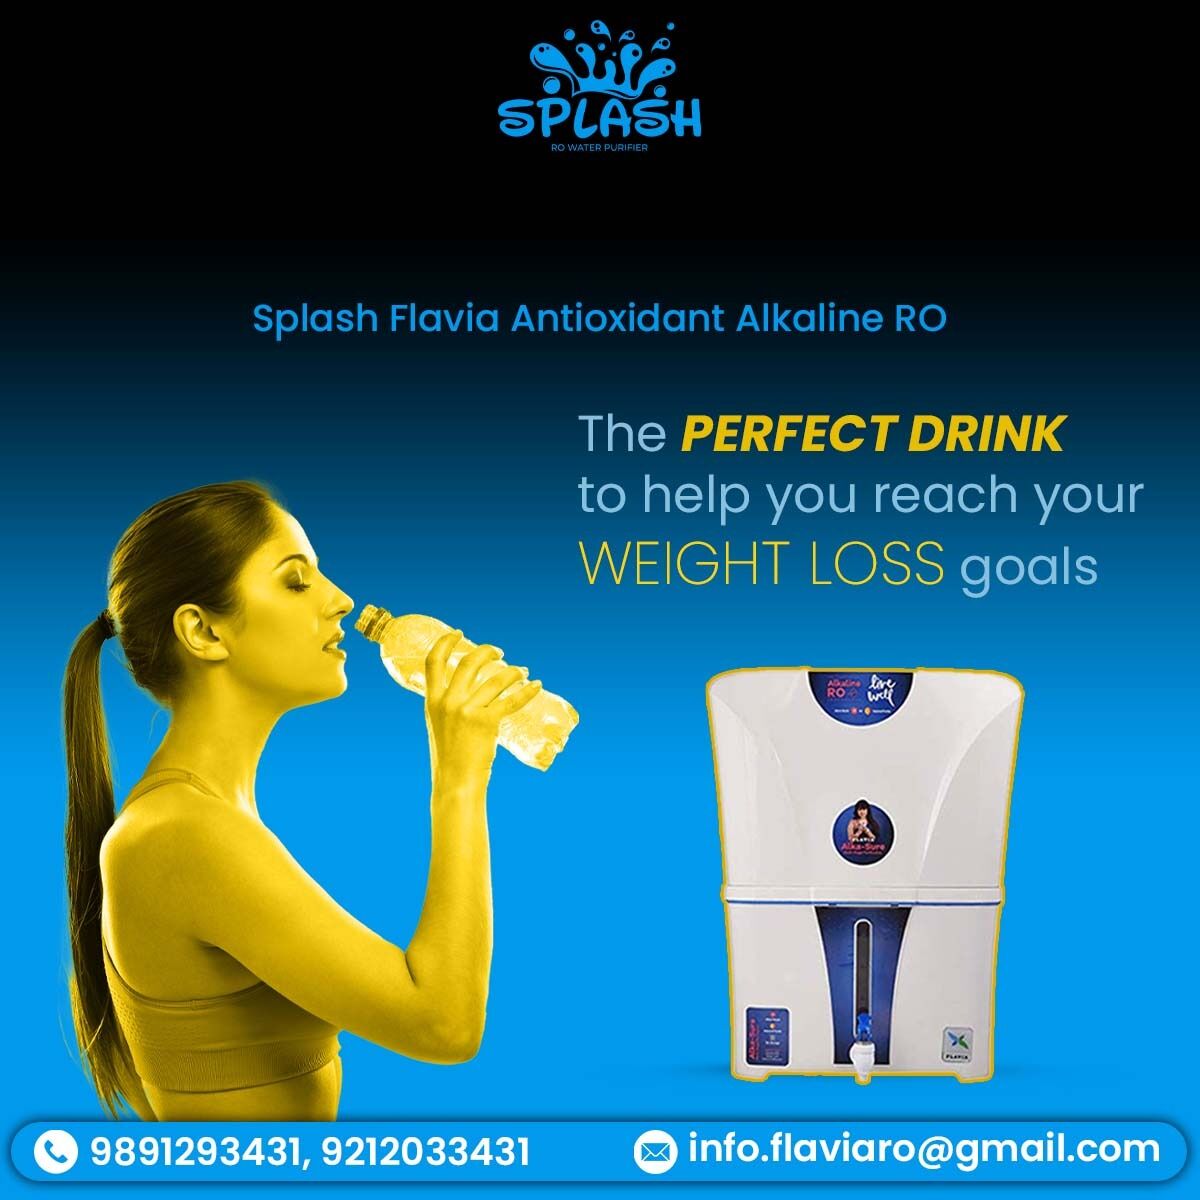 Splash Flavia Antioxidant Alkaline RO💧

The PERFECT DRINK to help you reach your WEIGHT LOSS goals
For more info, you can contact in below details
📲9891293431
🌐info.flaviaro@gmail.com

#waterpurifier #waterfilter #airpurifier #water #purewater #coway #cleanwater #ROtechnician